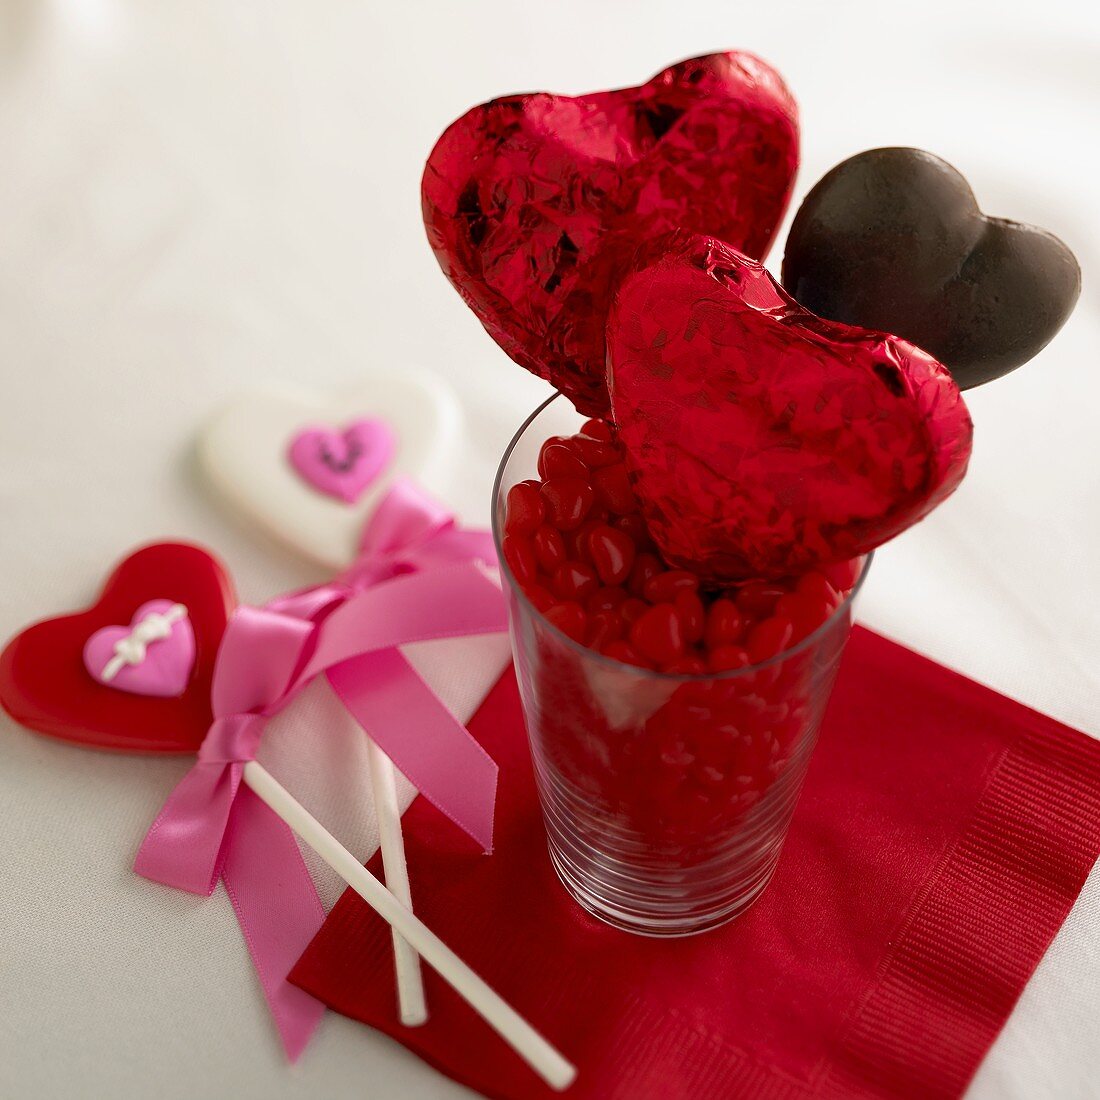 Cinnamon Hearts and Chocolate Lollipops for Valentine's Day